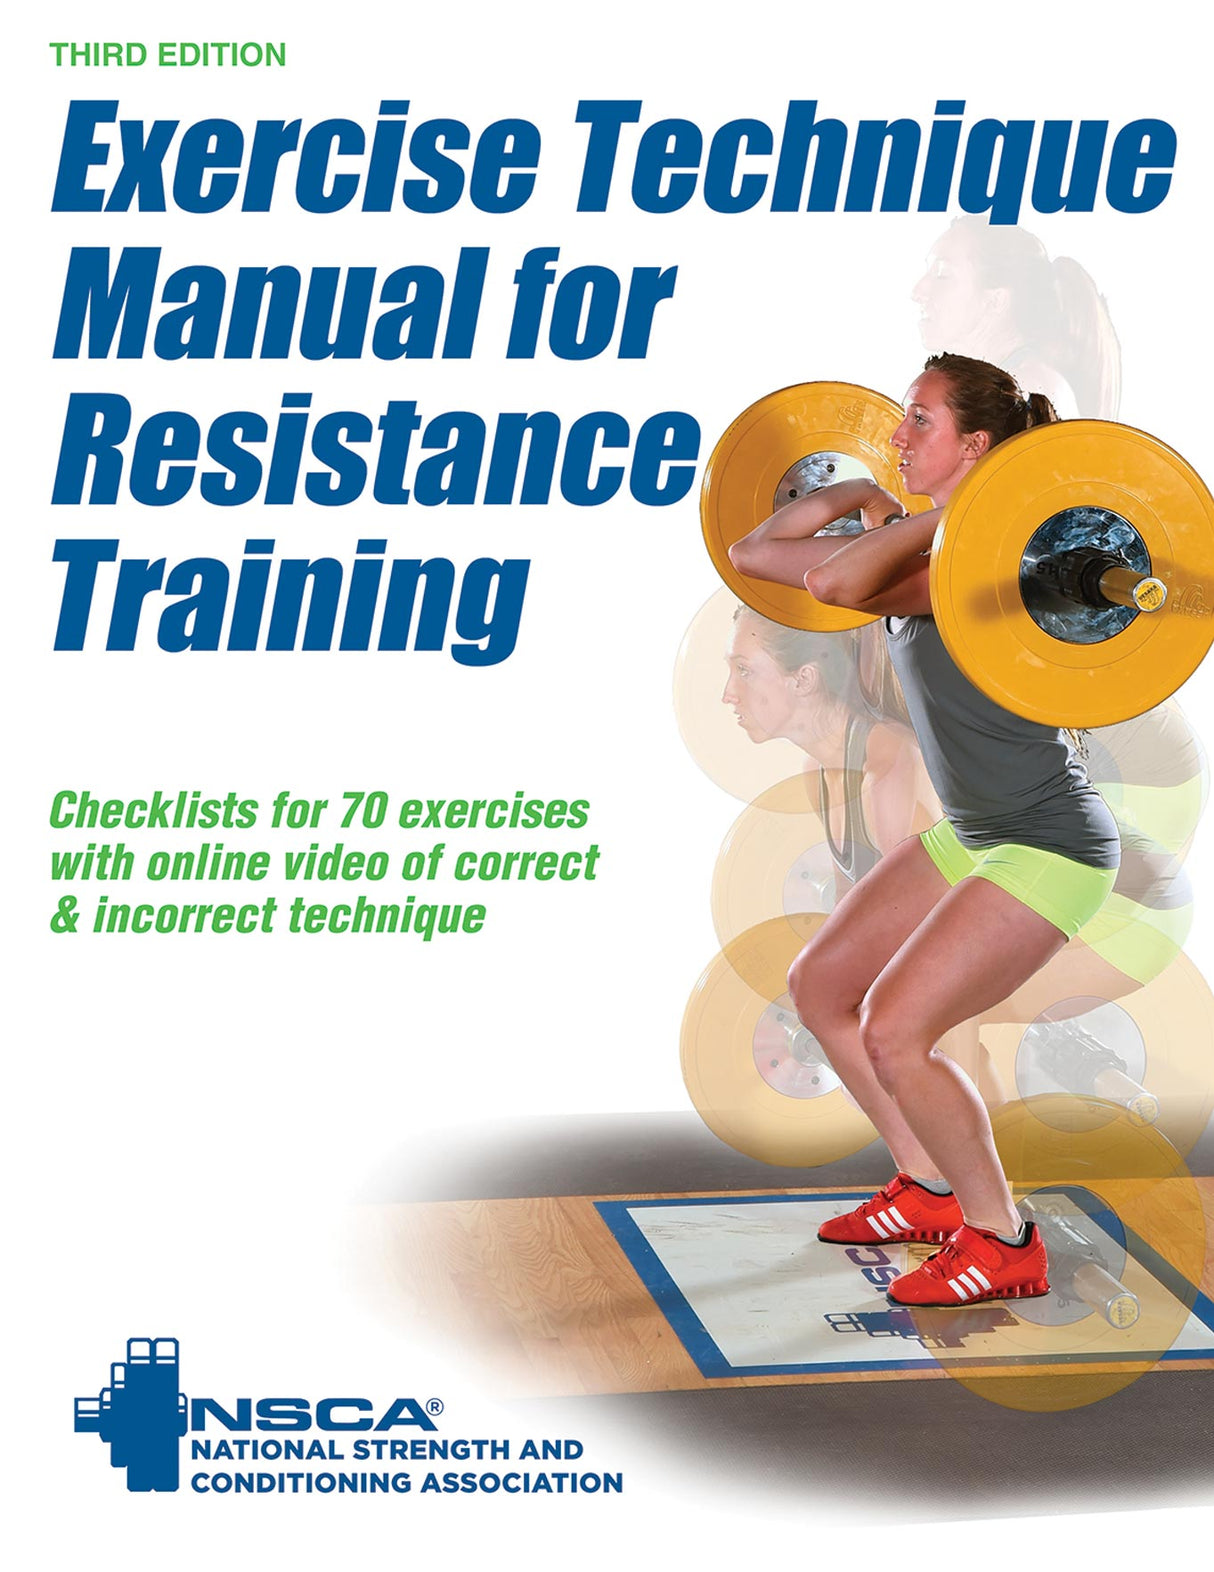 Exercise Technique Manual for Resistance Training-3rd Edition With Online Video